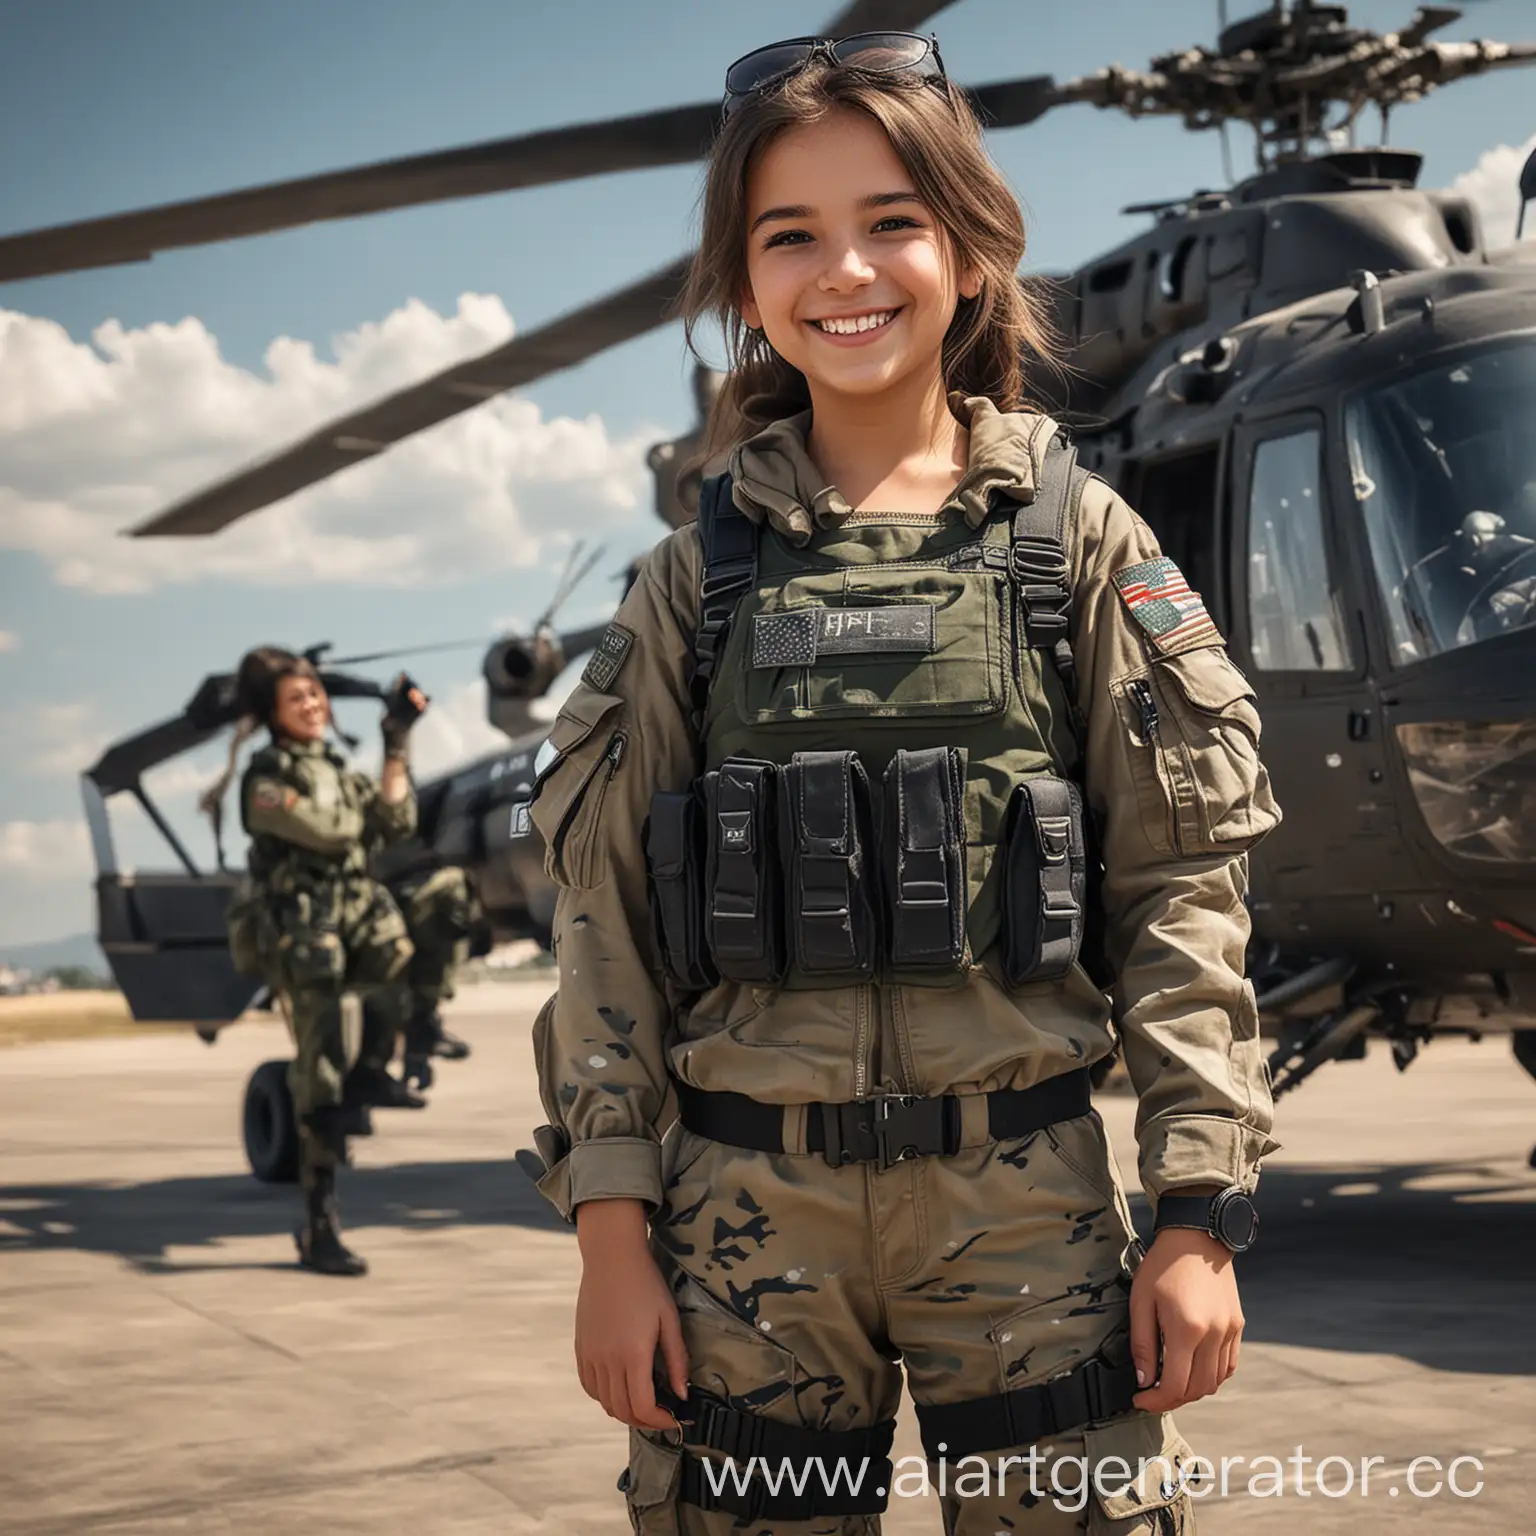 cute, girl 16 years old, short, in special forces armor, special forces clothing, smiling, military helicopter behind, neat, cute, full-length, realistic